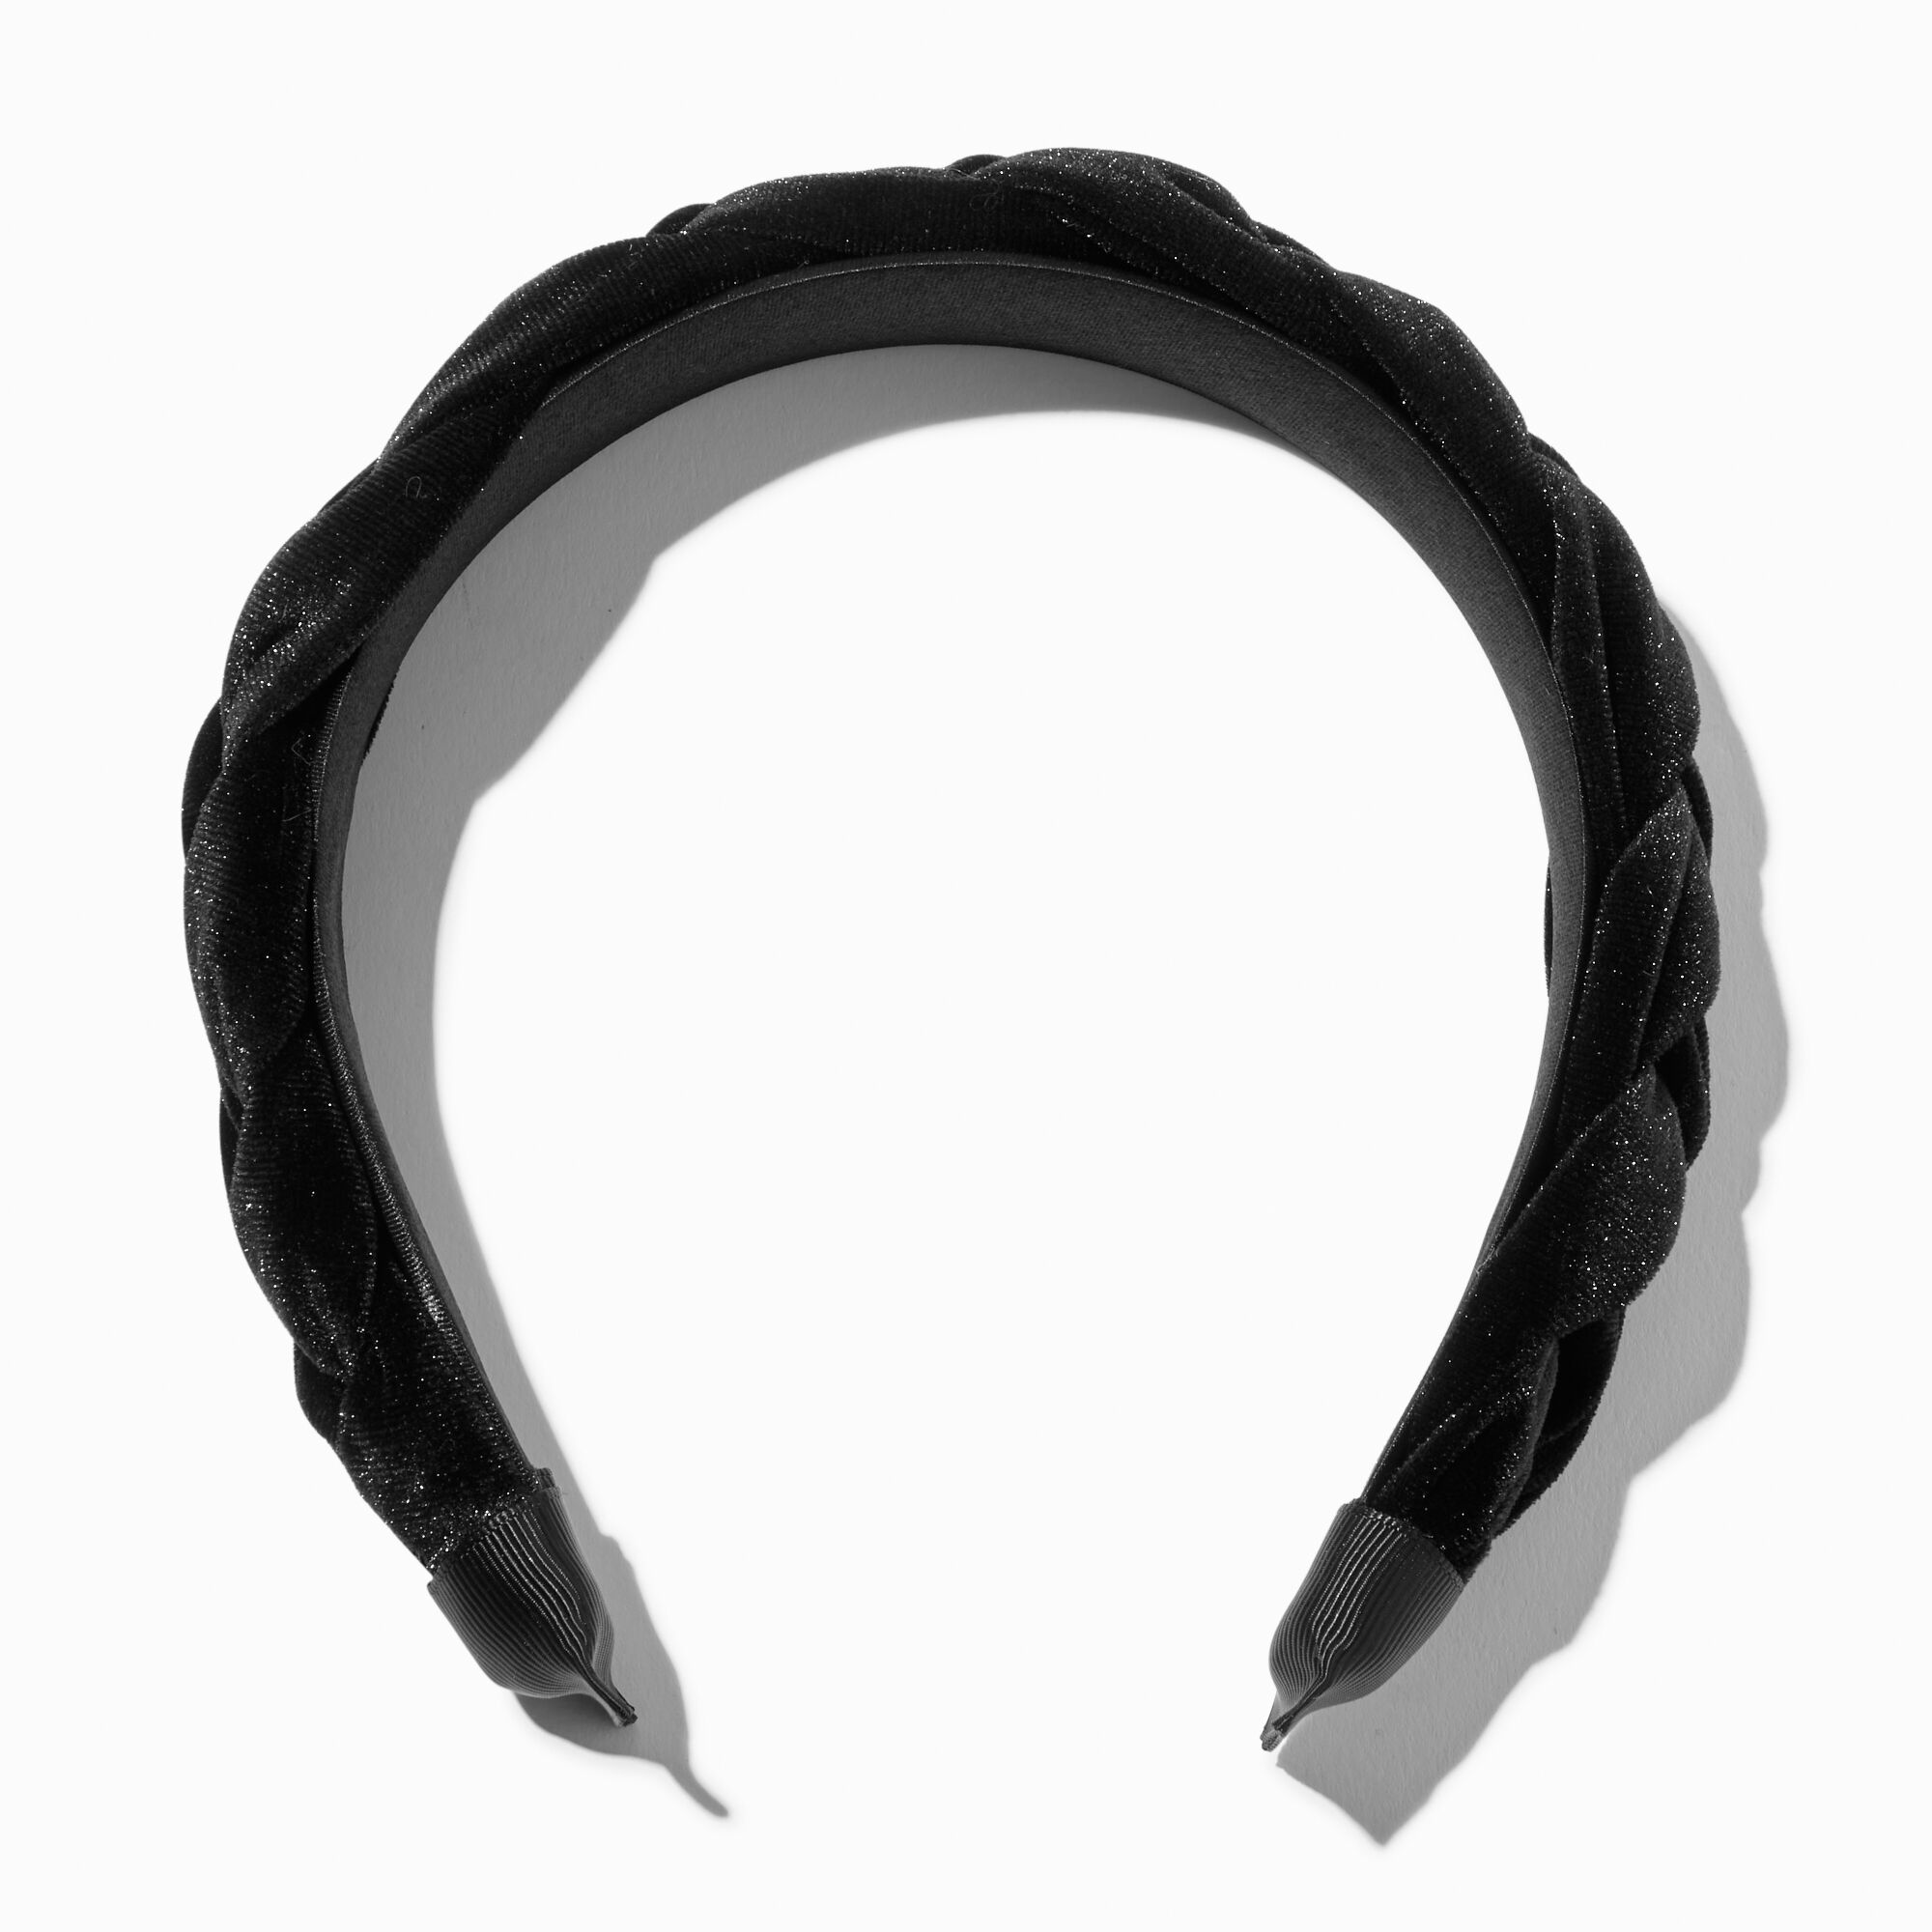 View Claires Braided Headband Black information